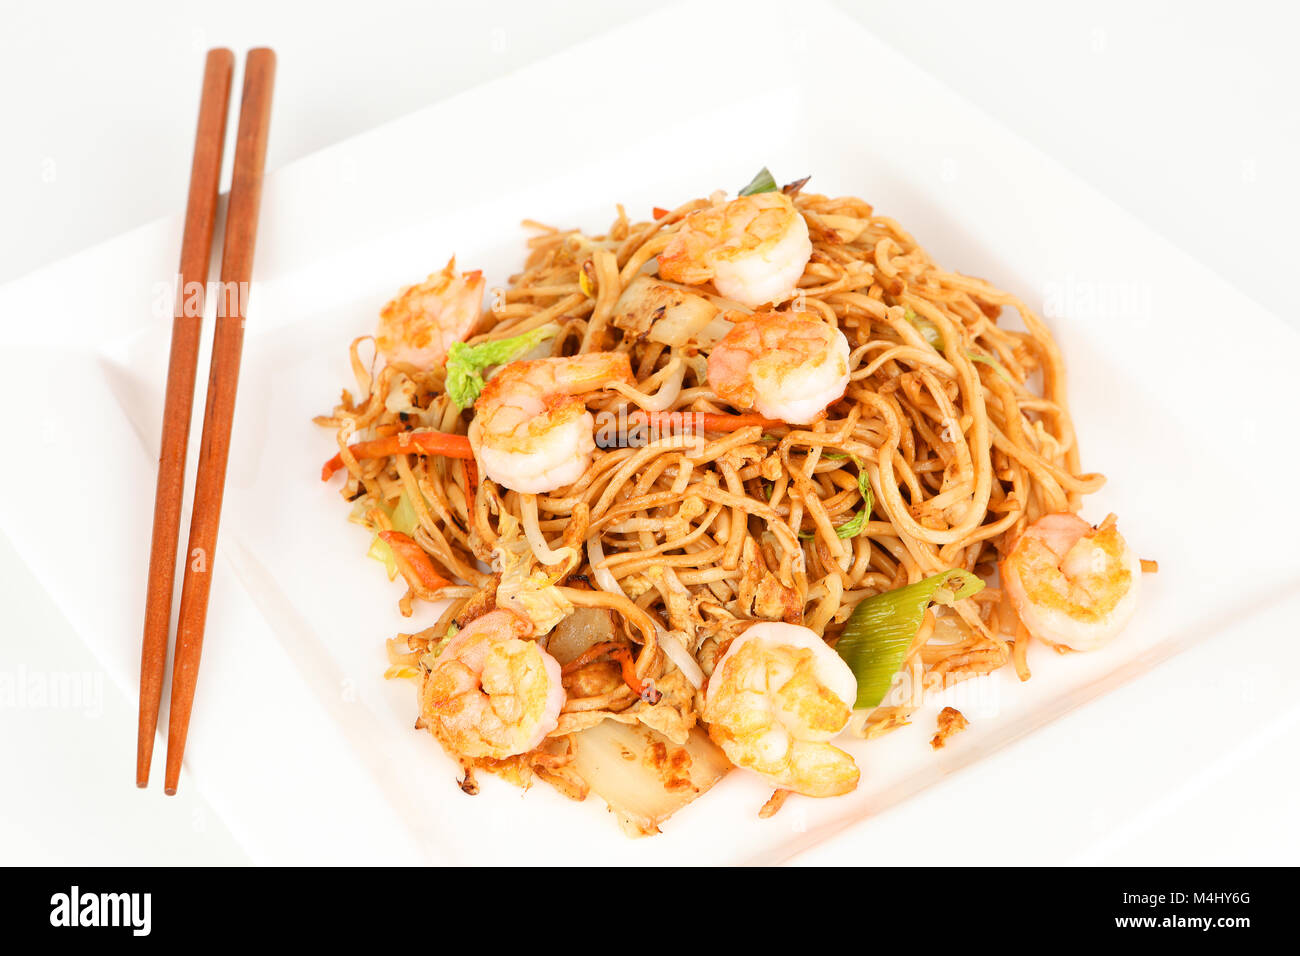 fried asian noodles with prawns Stock Photo